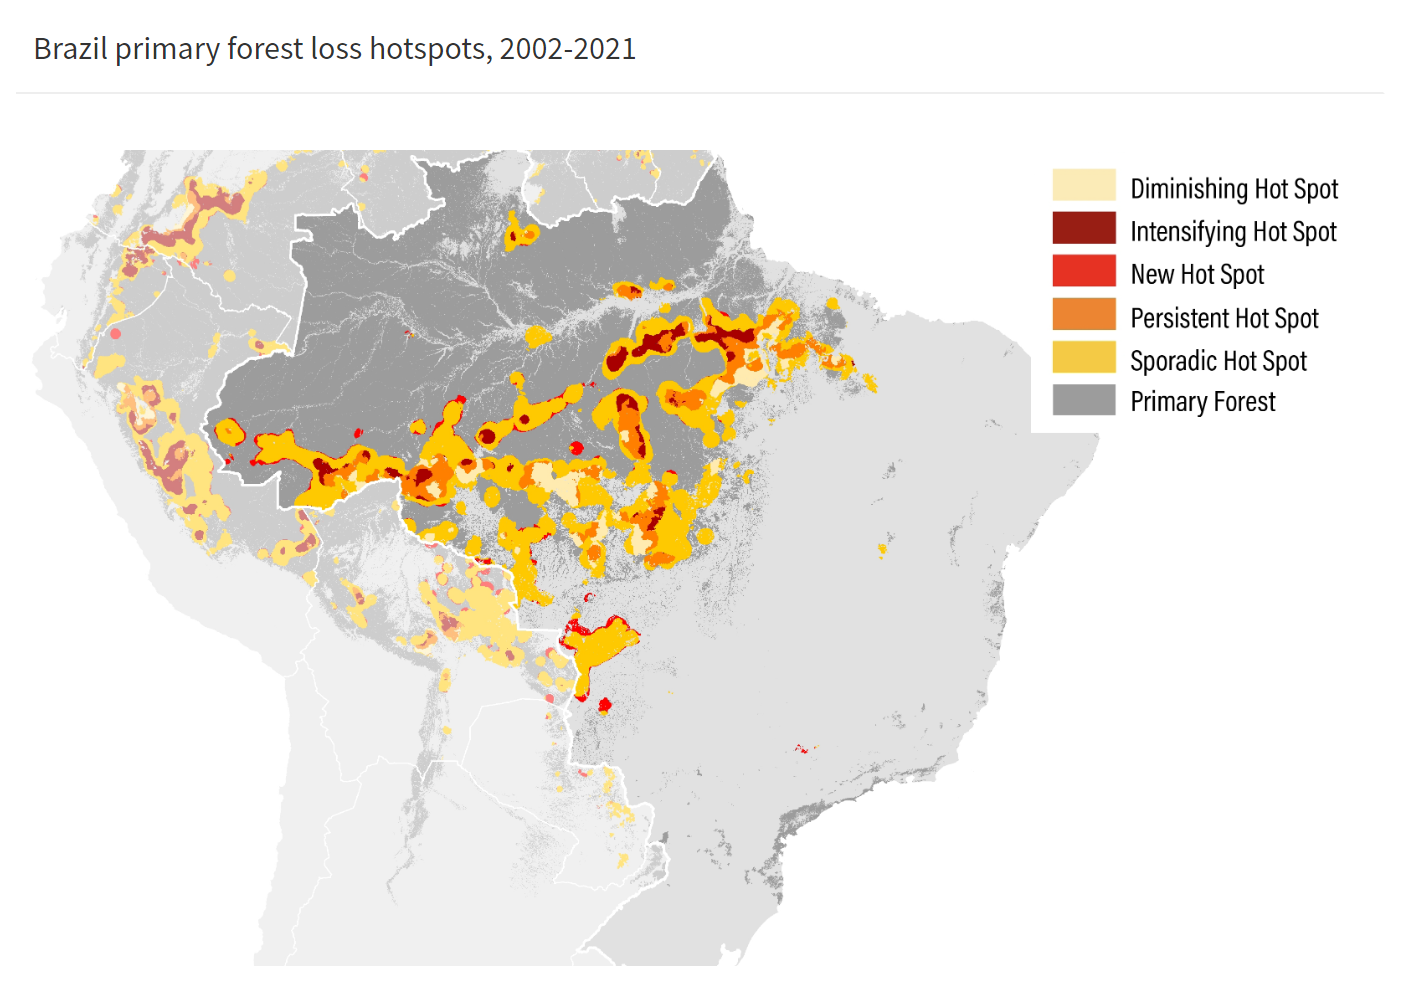 Map showing primary forest loss hot spots in Brazil, 2002-2021. As the country with the most primary rainforest to begin with, Brazil consistently tops the list for most primary forest loss. More than 40 percent of tropical primary forest loss in 2021 occurred in Brazil, a total of 1.5 million hectares. The rate of primary forest loss in Brazil has been persistently high the past several years. Loss related to fires has fluctuated depending on the level of out-of-control forest fires, most recently with a spike in 2020 in the Amazon and the Pantanal. Meanwhile, non-fire losses, which in Brazil are most often associated with agricultural expansion, increased 9 percent from 2020 to 2021. Graphic: WRI